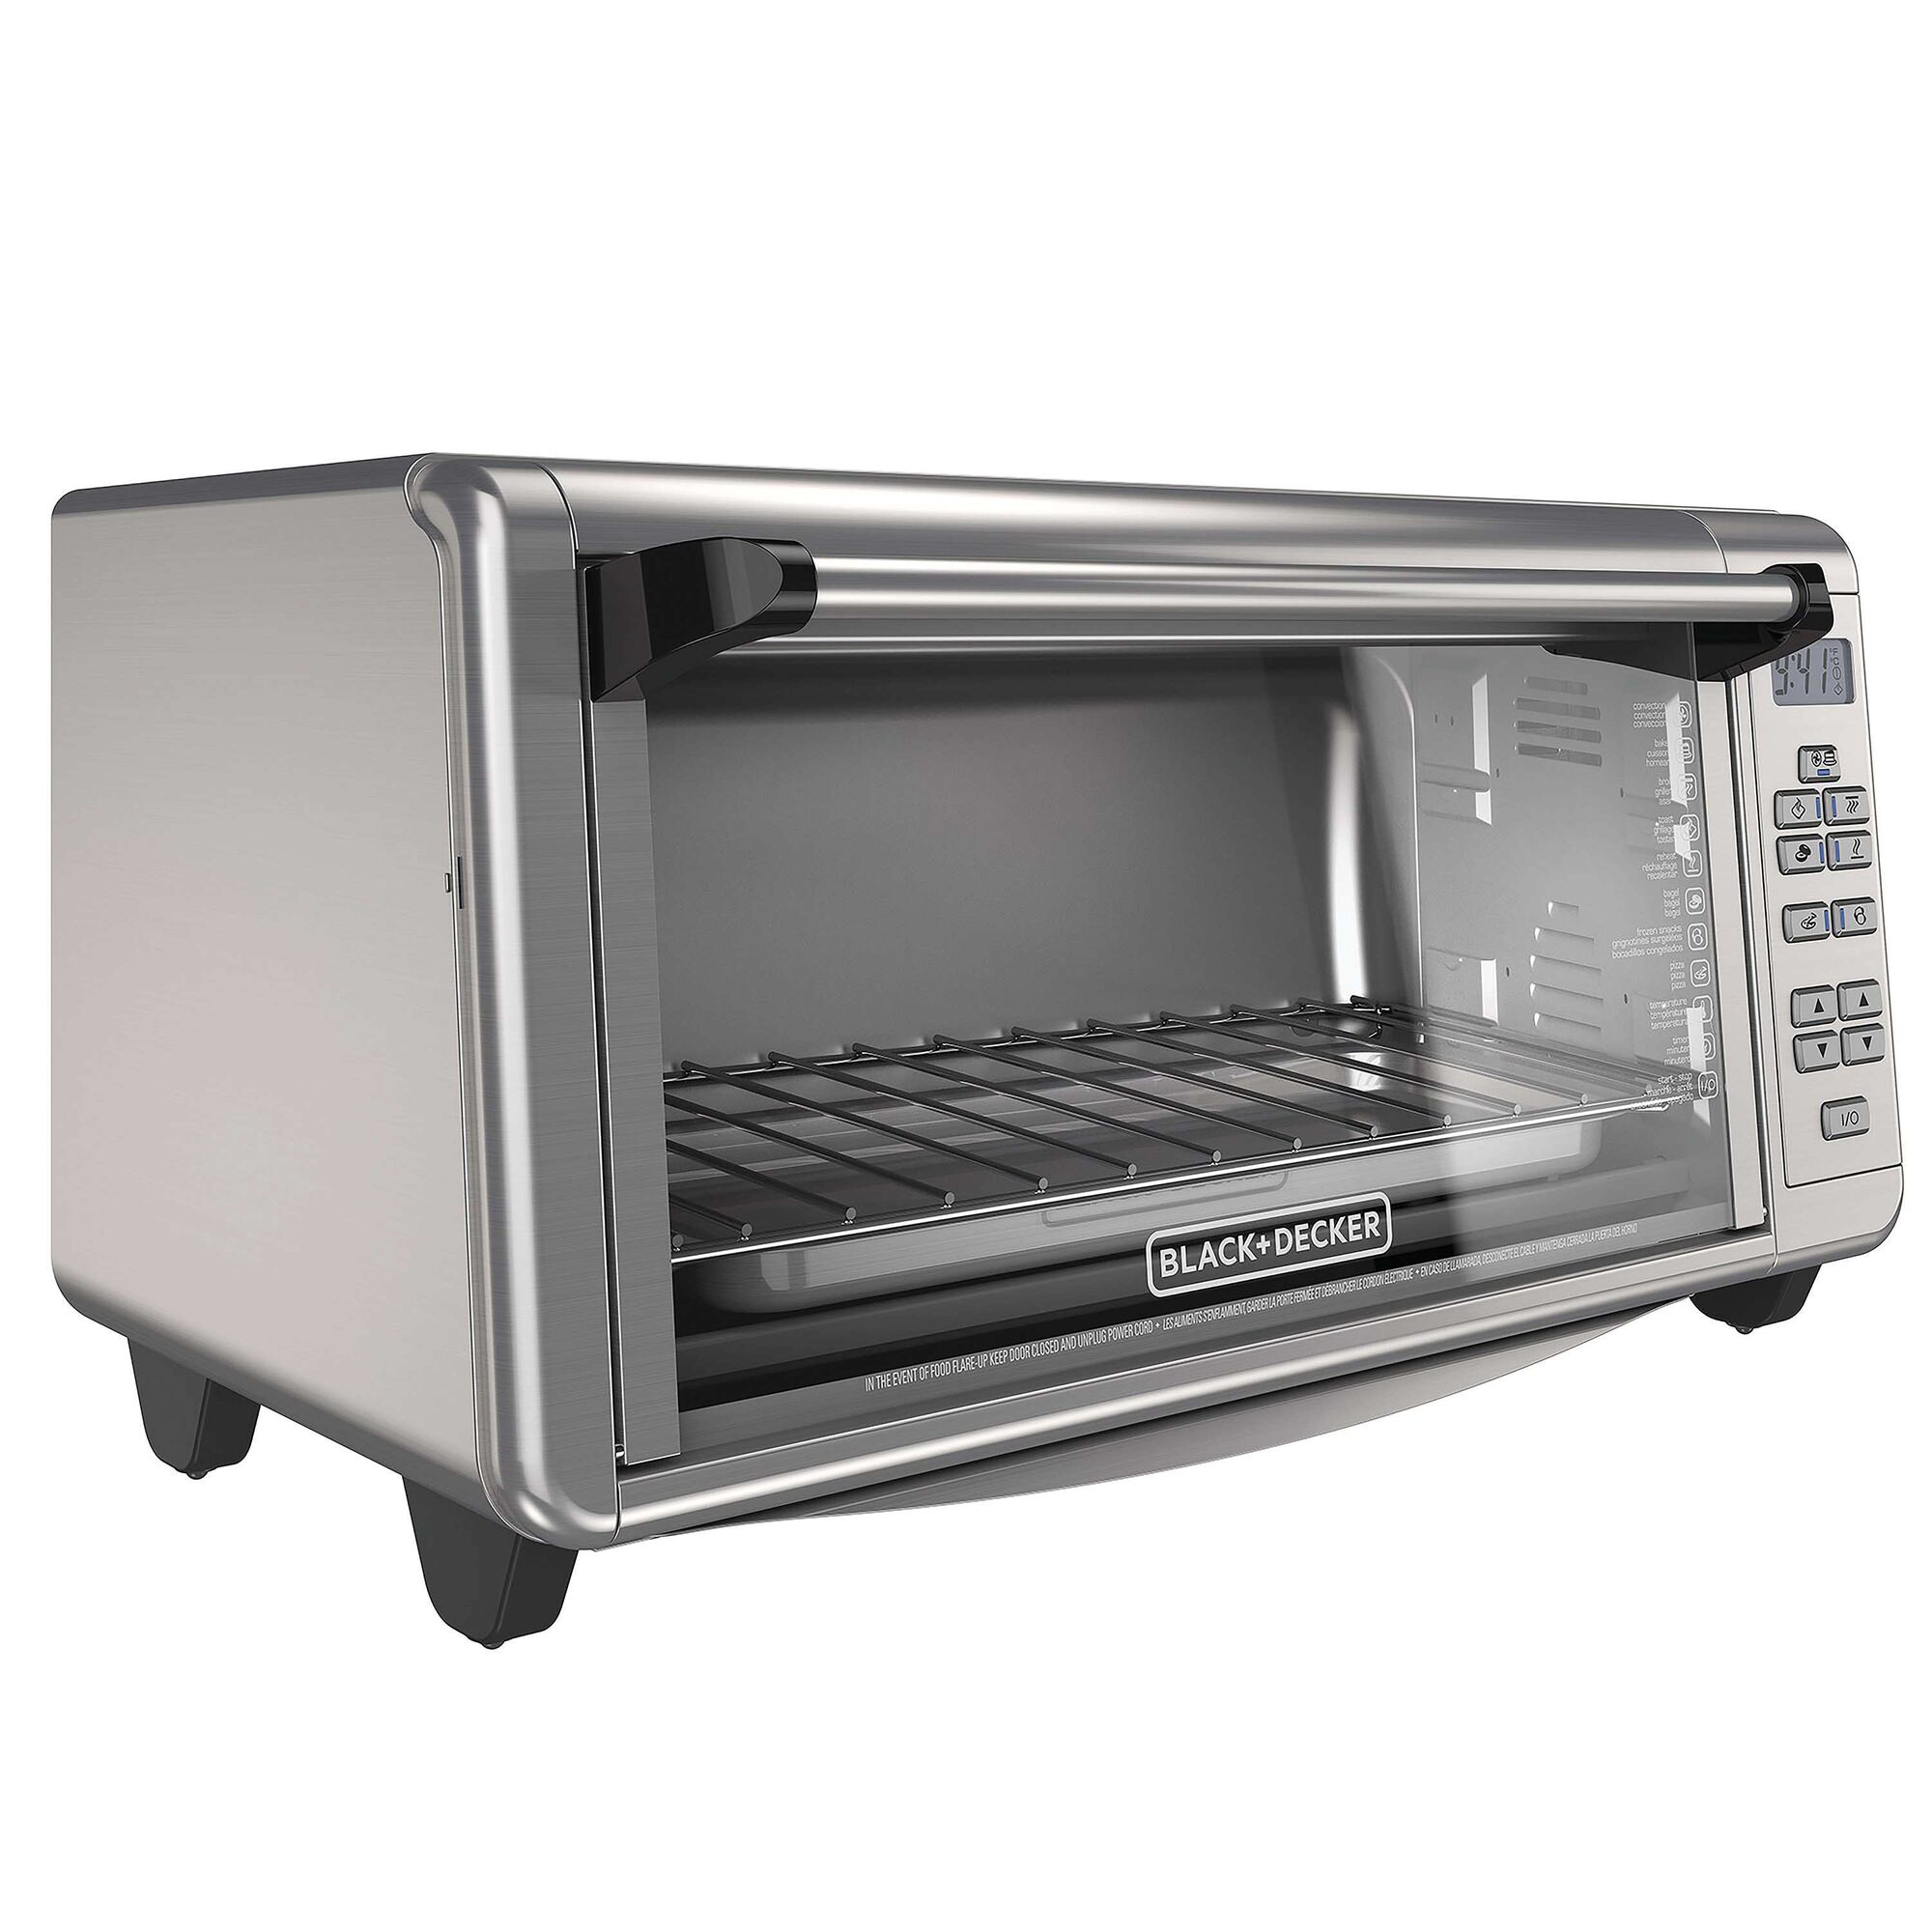 Profile of 8 slice digital extra wide convection oven.